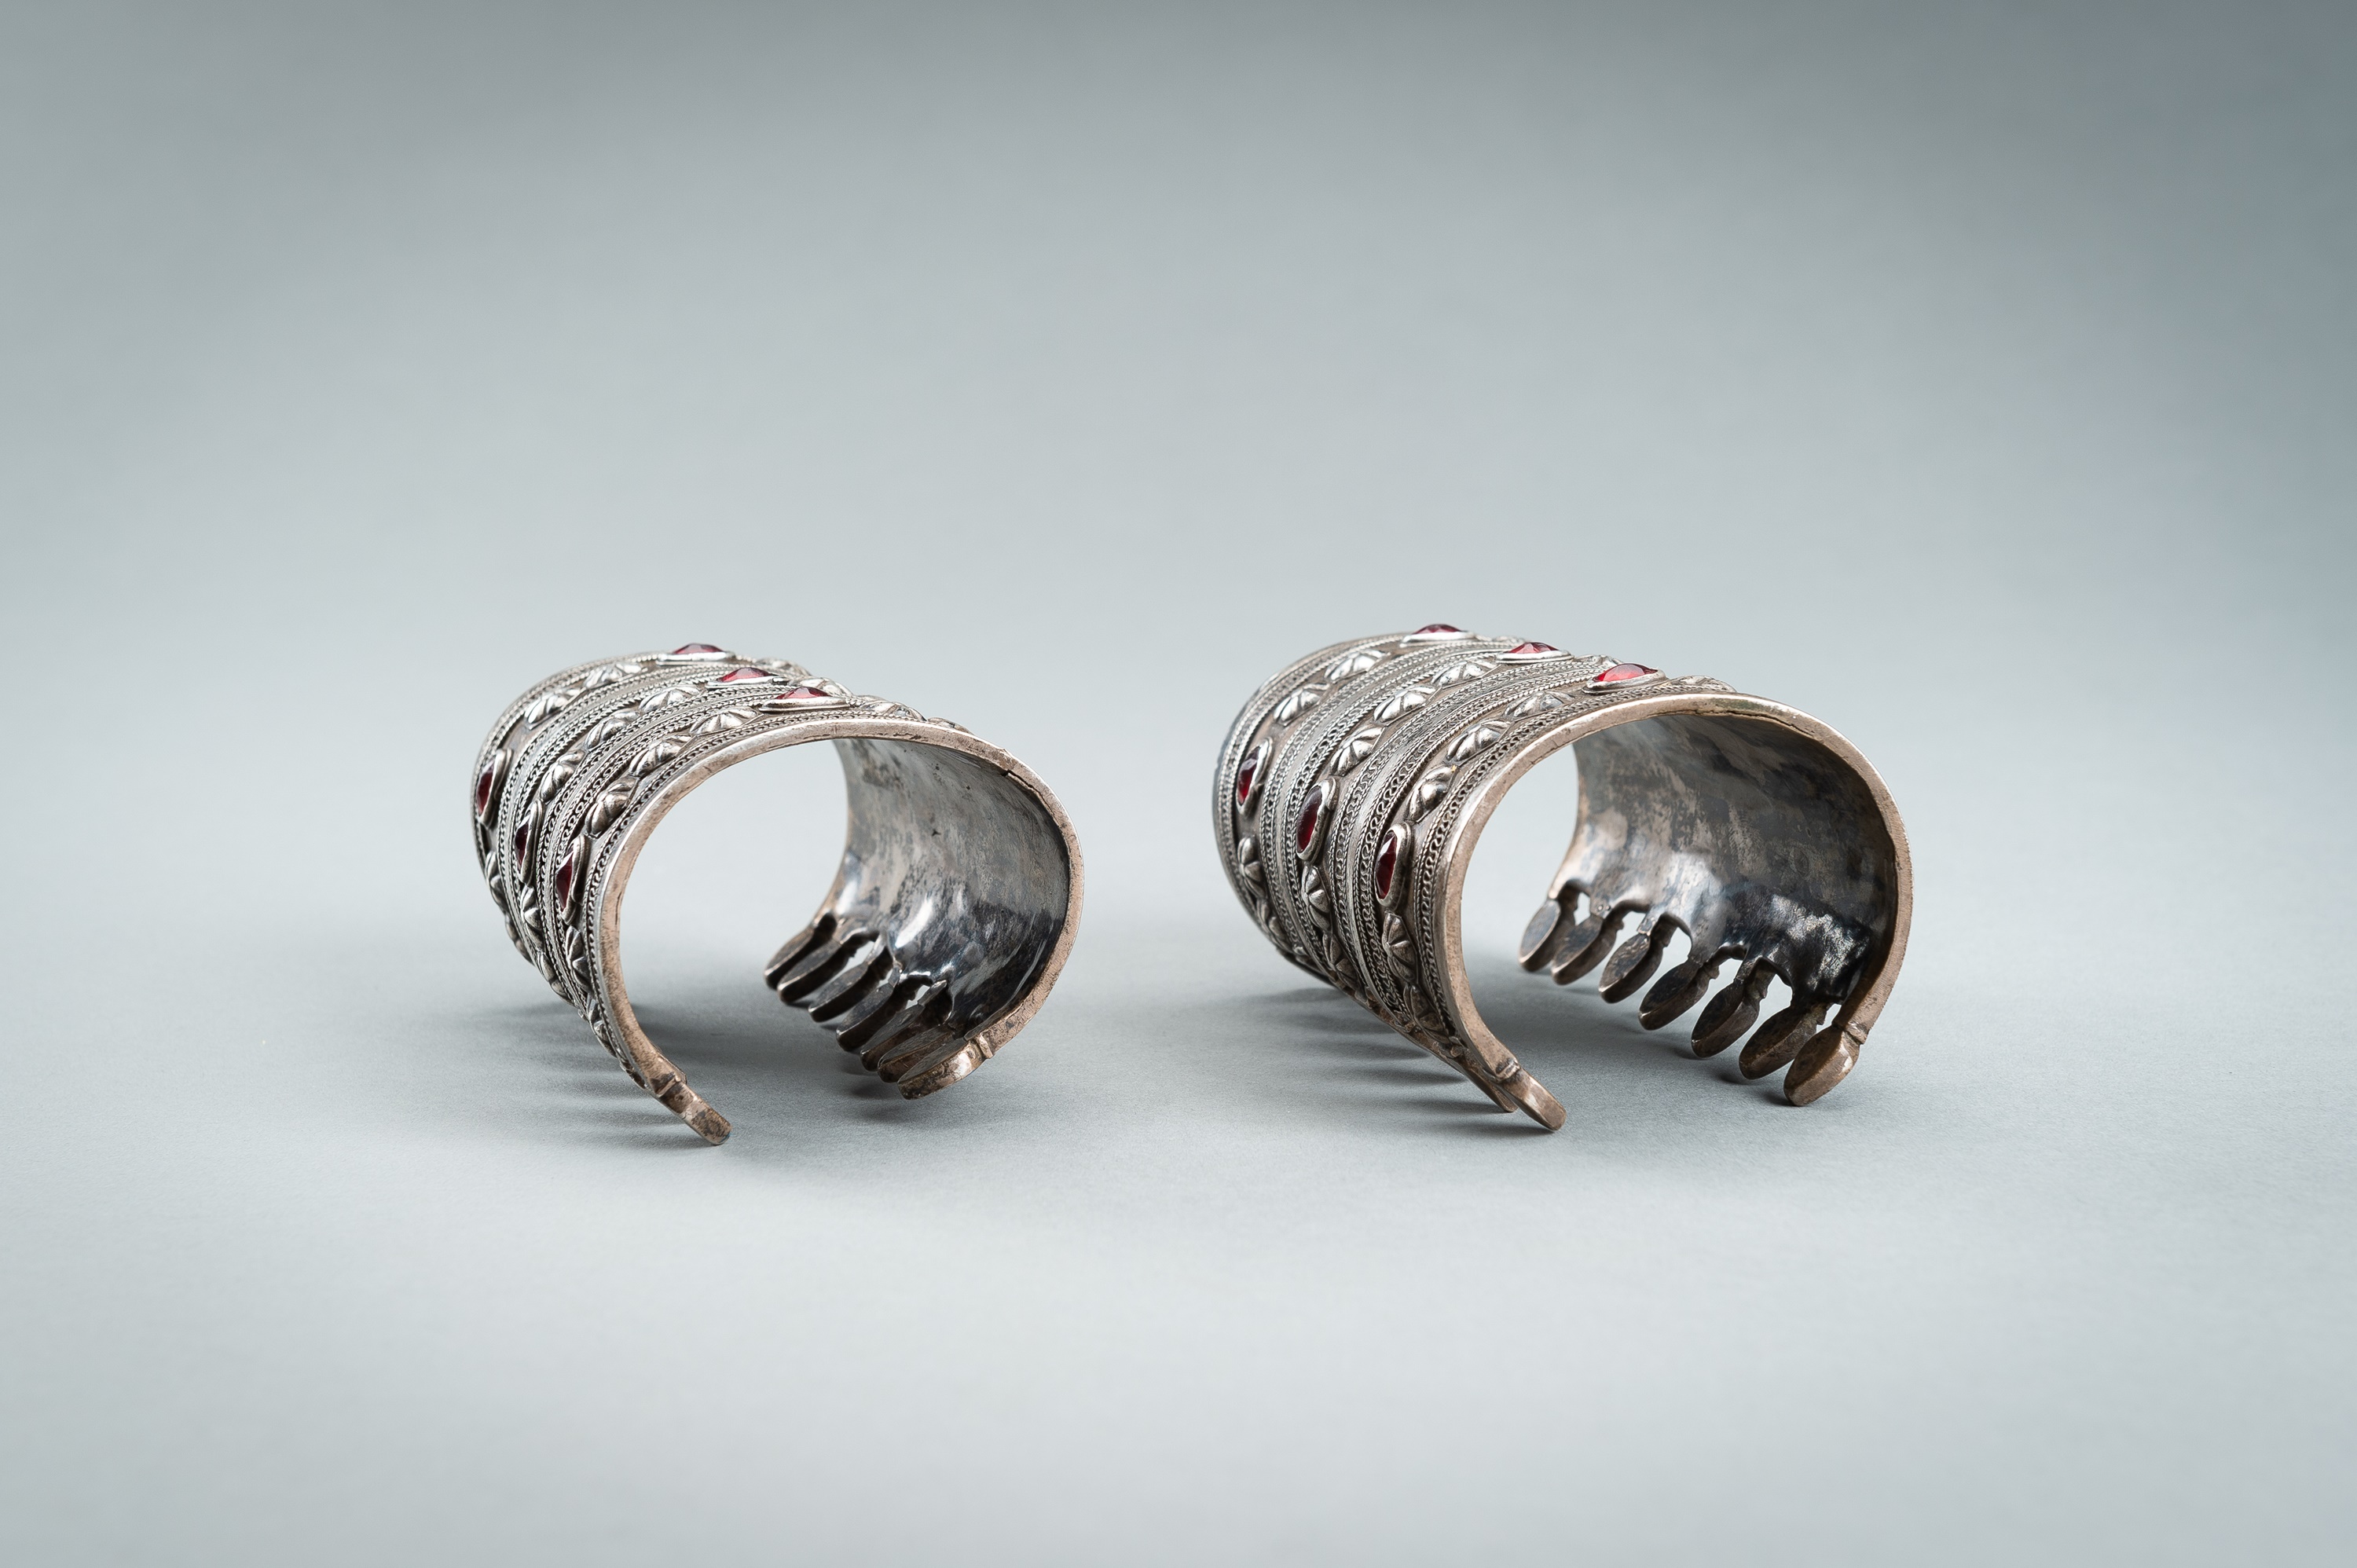 A PAIR OF TURKOMAN GLASS INSET SILVER BRACELETS, c. 1900s - Image 9 of 12